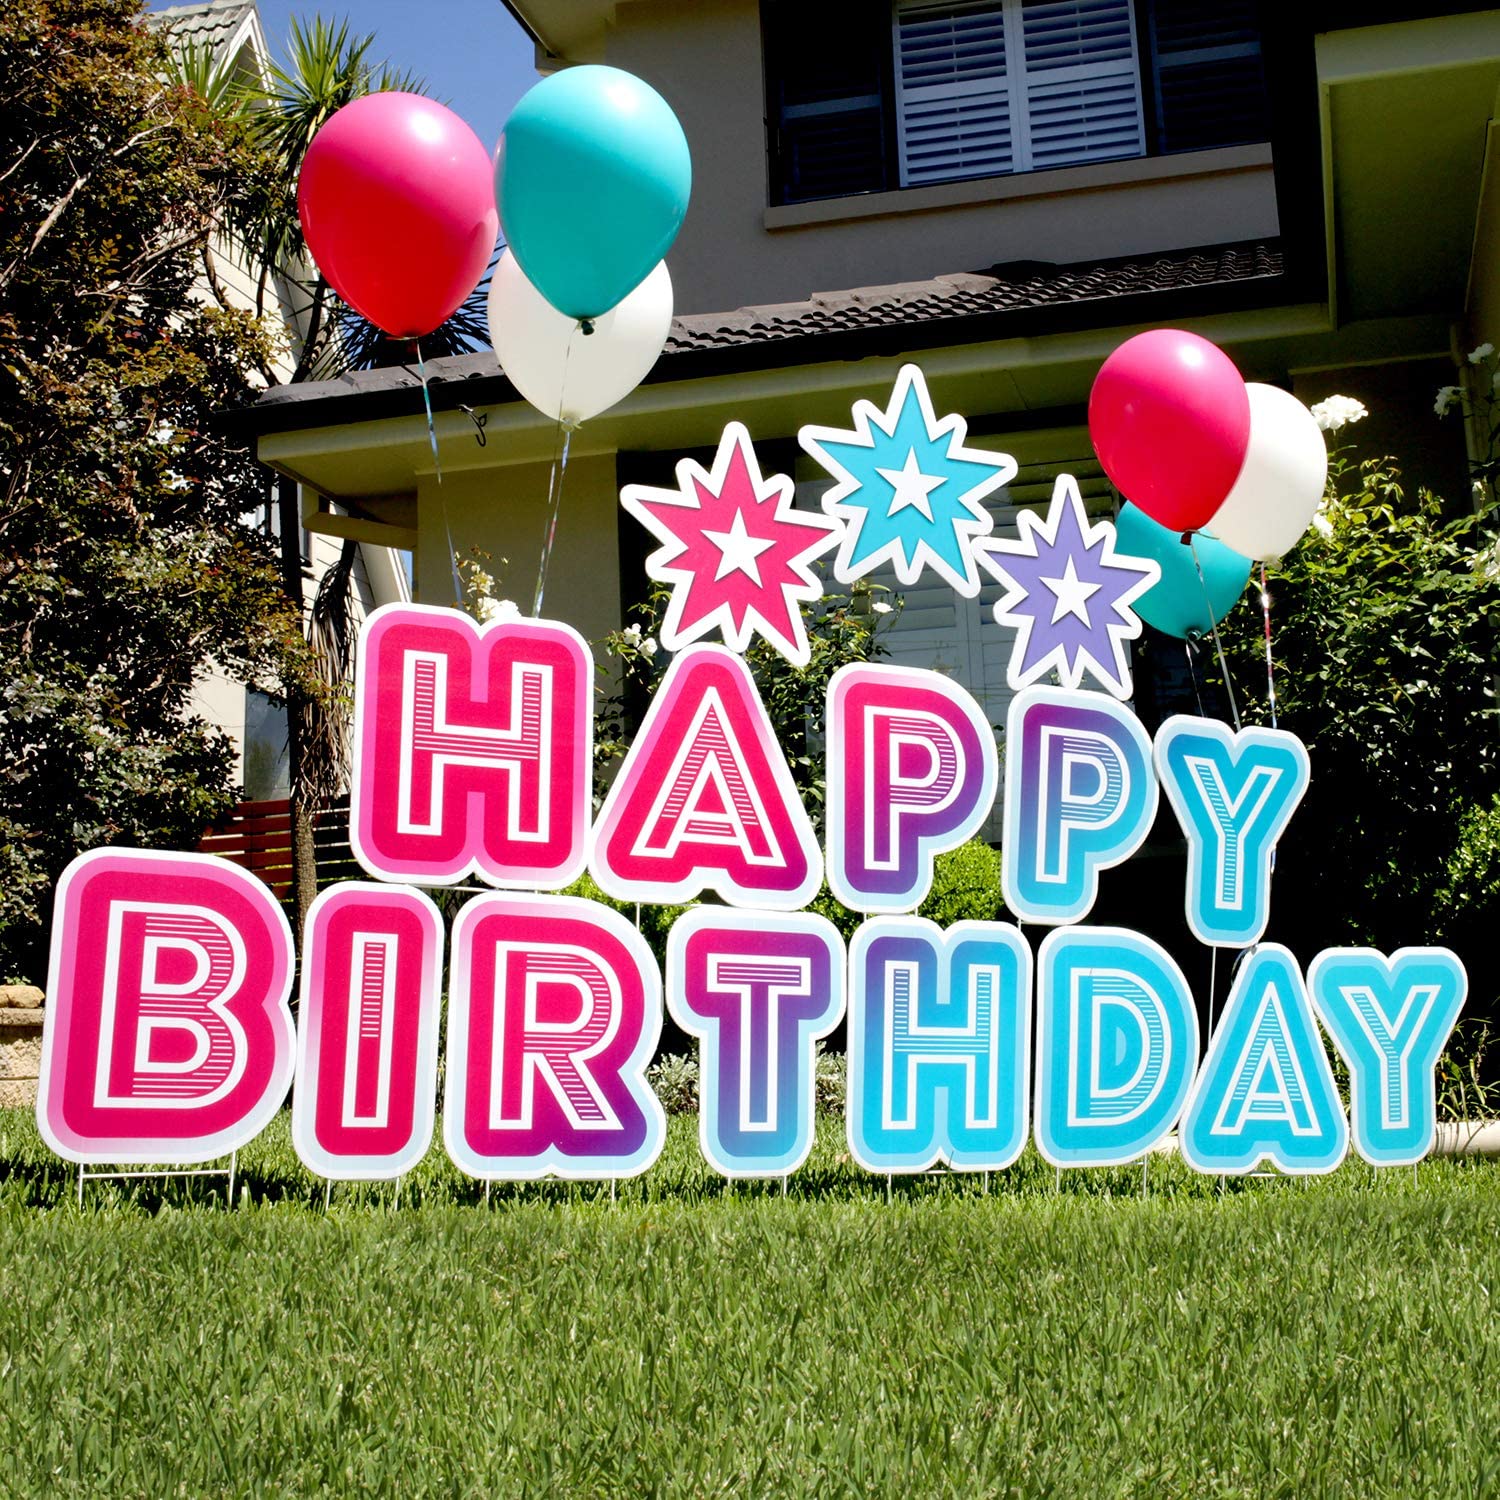 Happy Birthday Yard Sign Set 3-in-1 Stacking Birthday Lawn Letters Easy Install Reusable Happy Birthday Yard Signs with Stakes and Stars (46 x 160 nti)